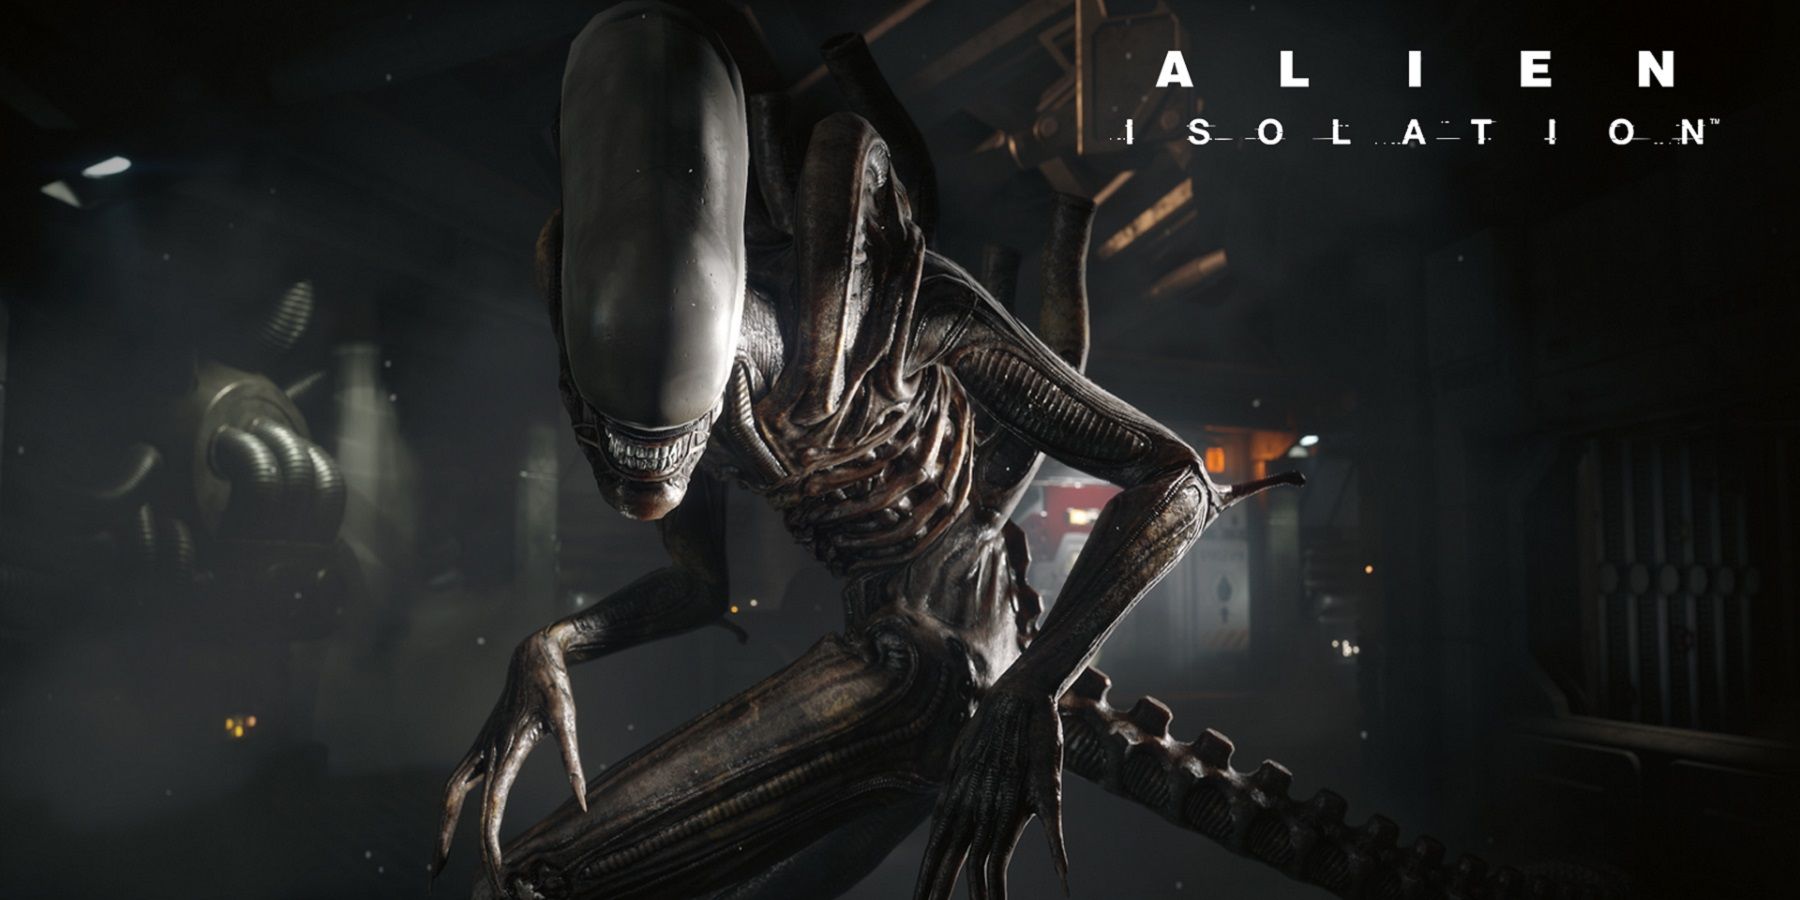 Image from Alien Isolation showing a close up of the Xenomorph.